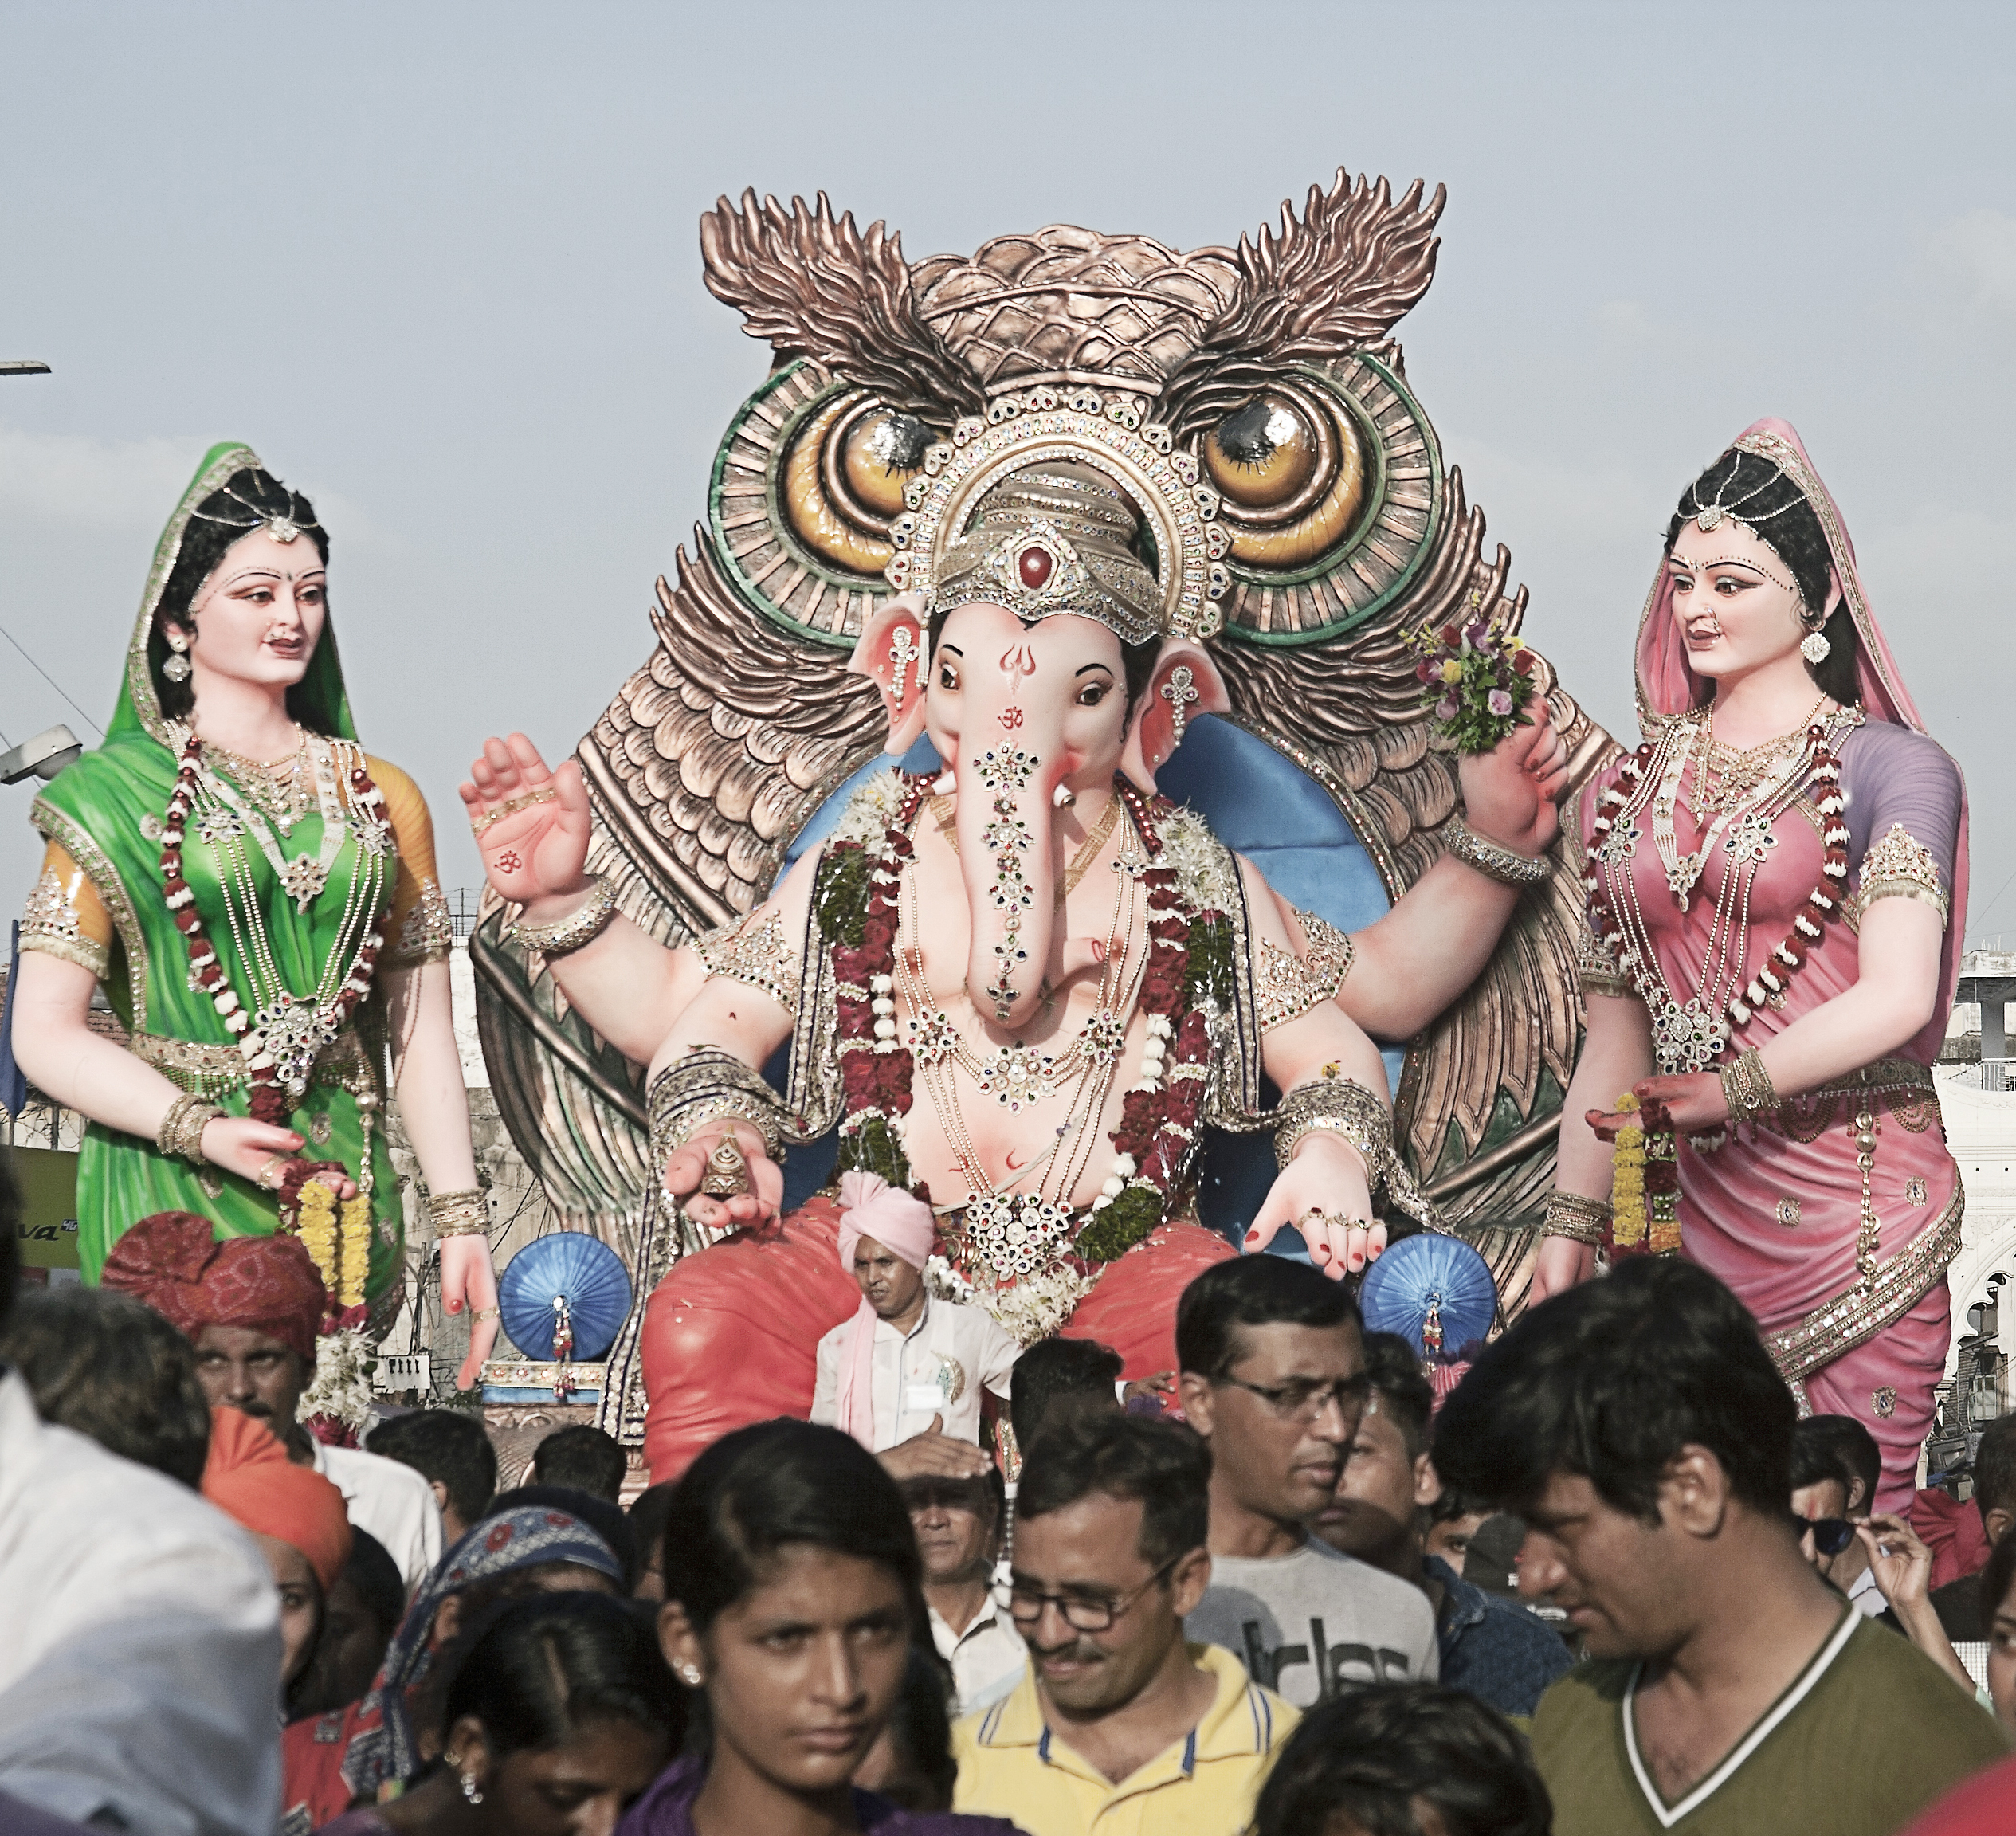 A large Ganesh murthi with two forms of the Divine Mother on either side is carried in a Ganesh Chaturthi Parade